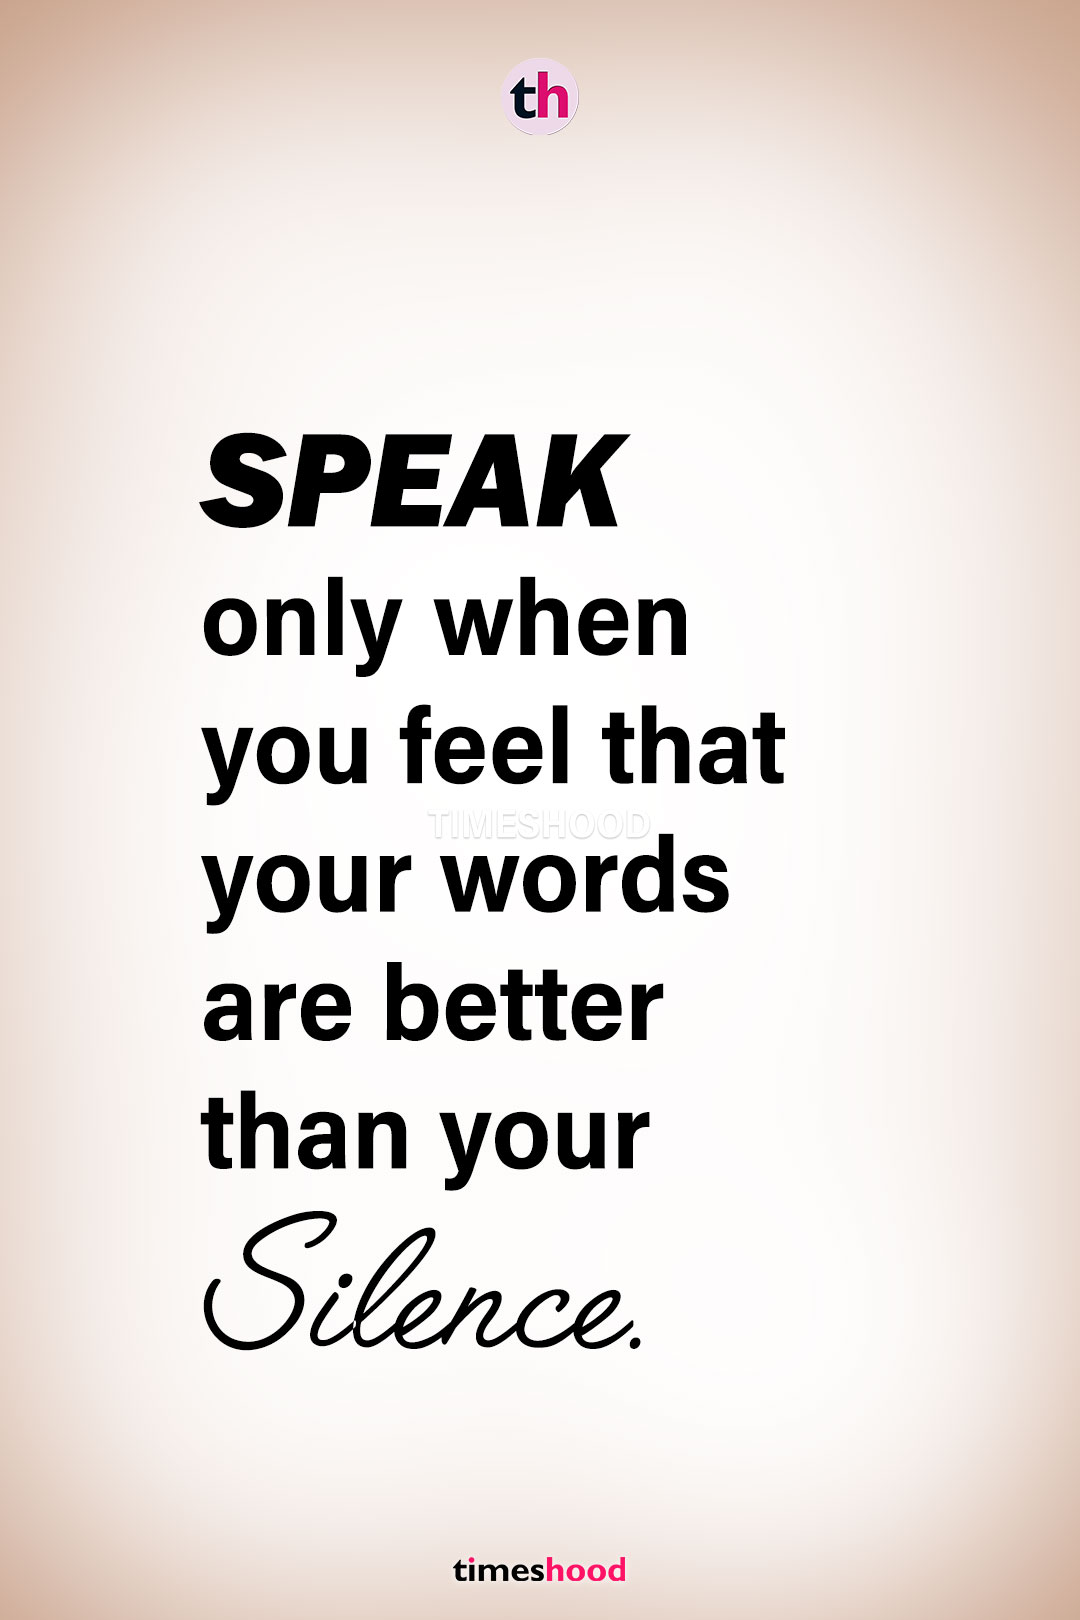 Speak only when you feel - quotes on silence attitude